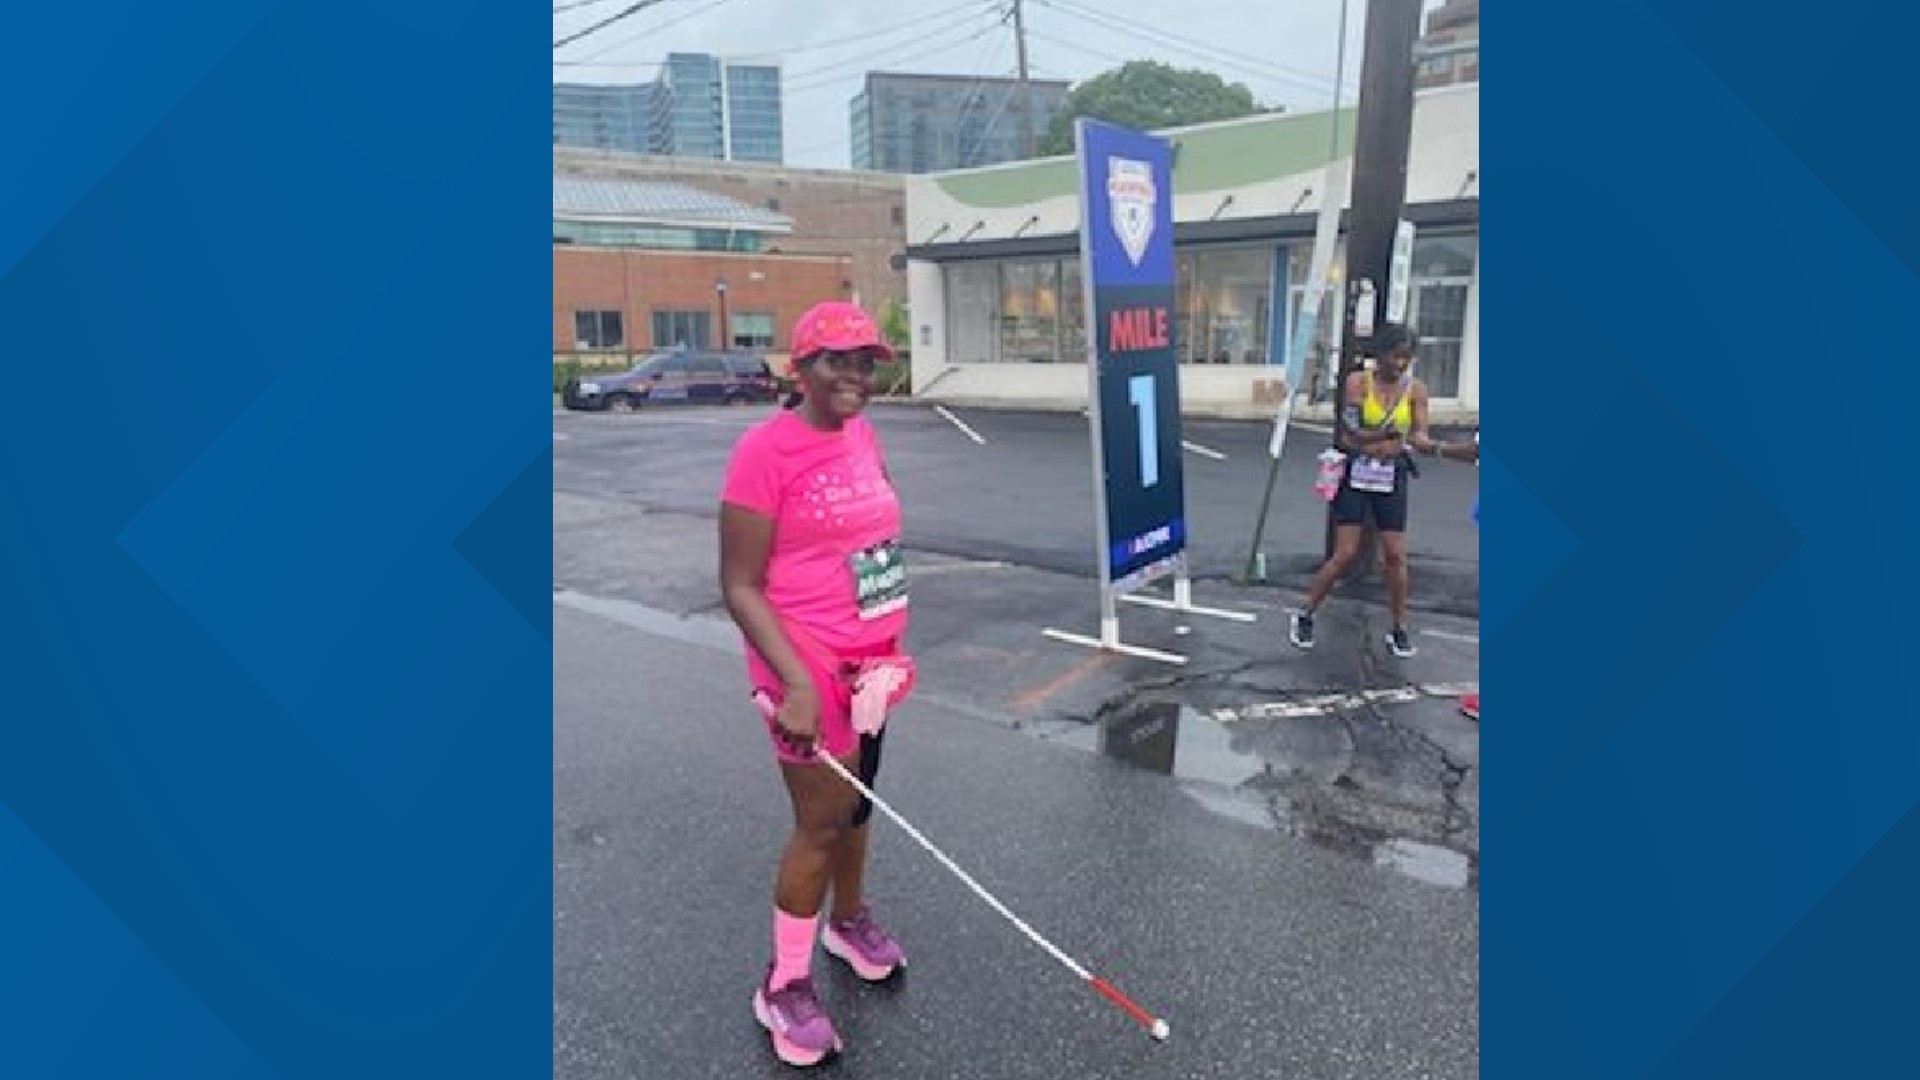 Rauni Person, a Suwanee resident, has an inspiring story to tell about her journey to the AJC Peachtree Road Race.